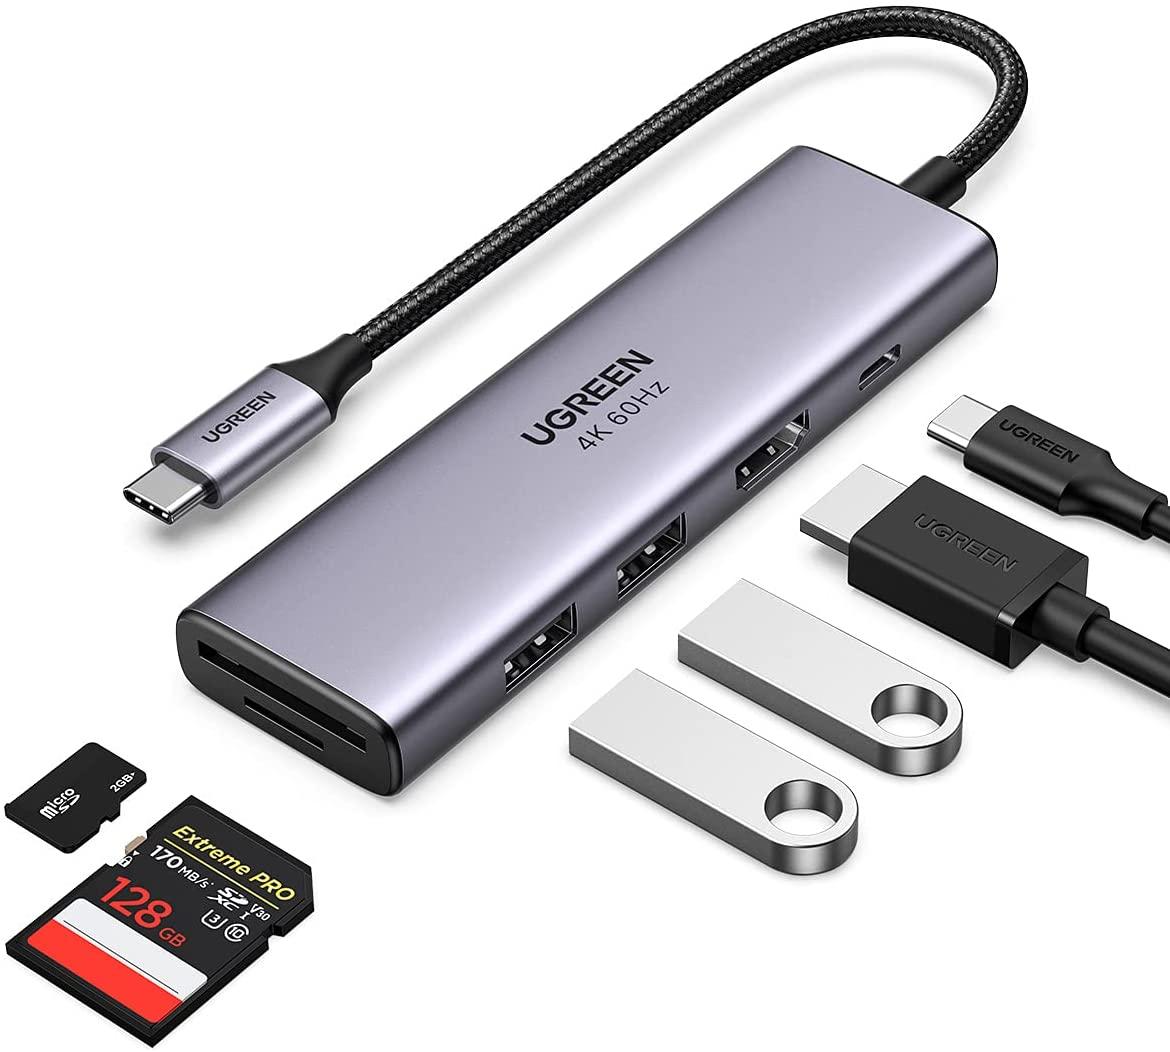  6-in-1 USB Type C Dongle Adapter with SD and HDMI for $16.89 Shipped